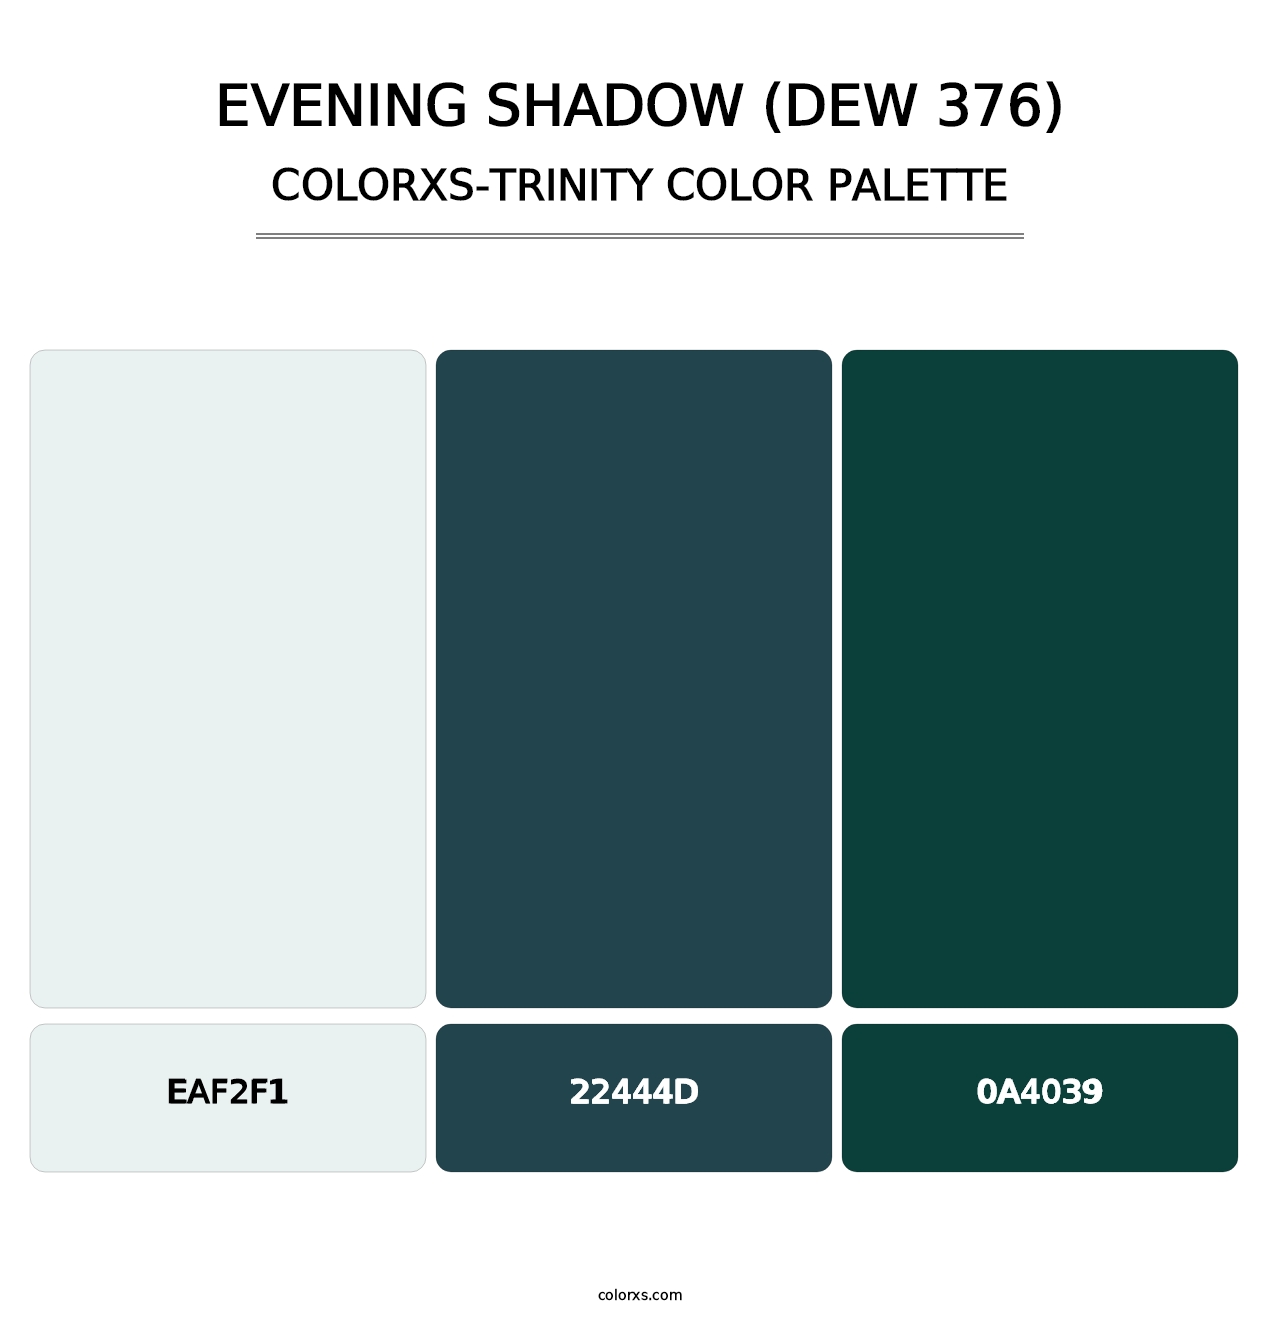 Evening Shadow (DEW 376) - Colorxs Trinity Palette